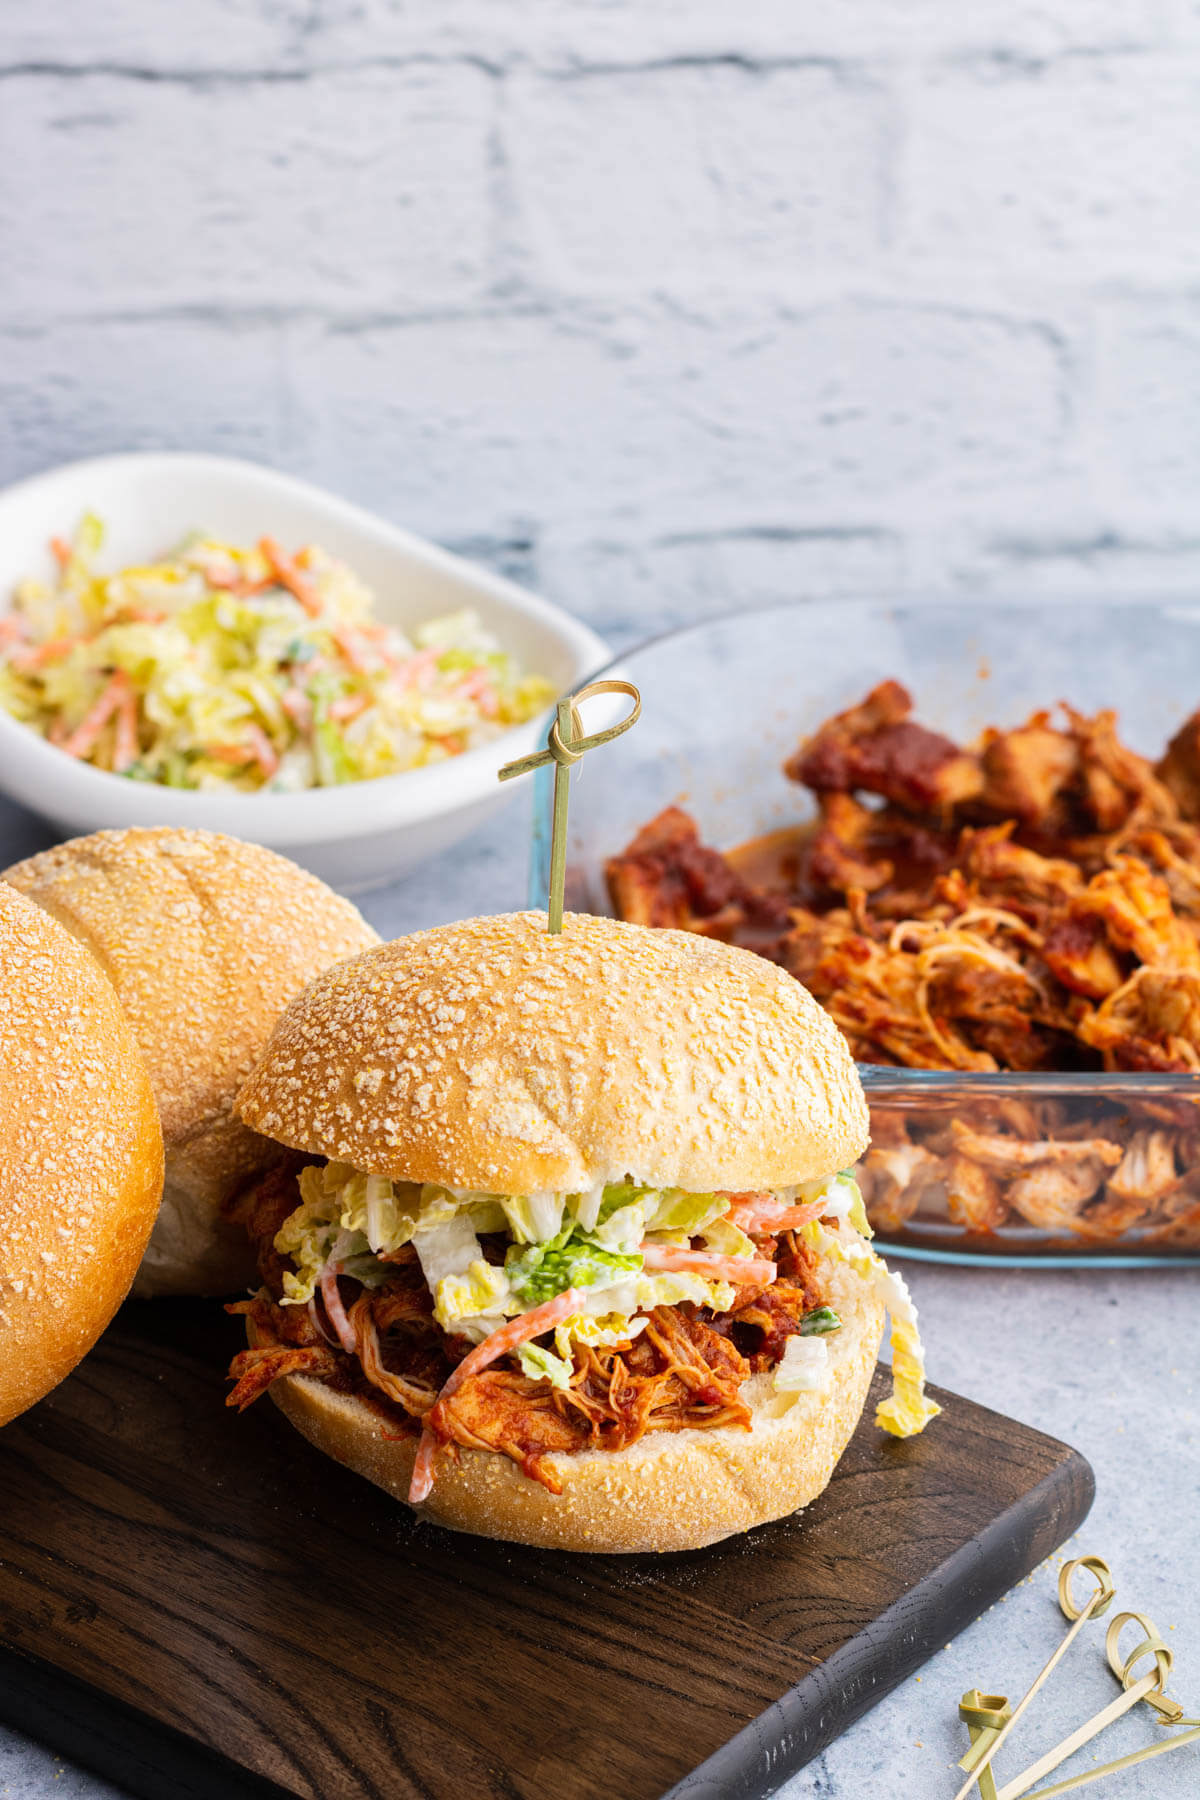 A soft white bun containing BBQ Pulled Chicken and coleslaw surrounded by a glass dish of BBQ Pulled Chicken, coleslaw, and buns.